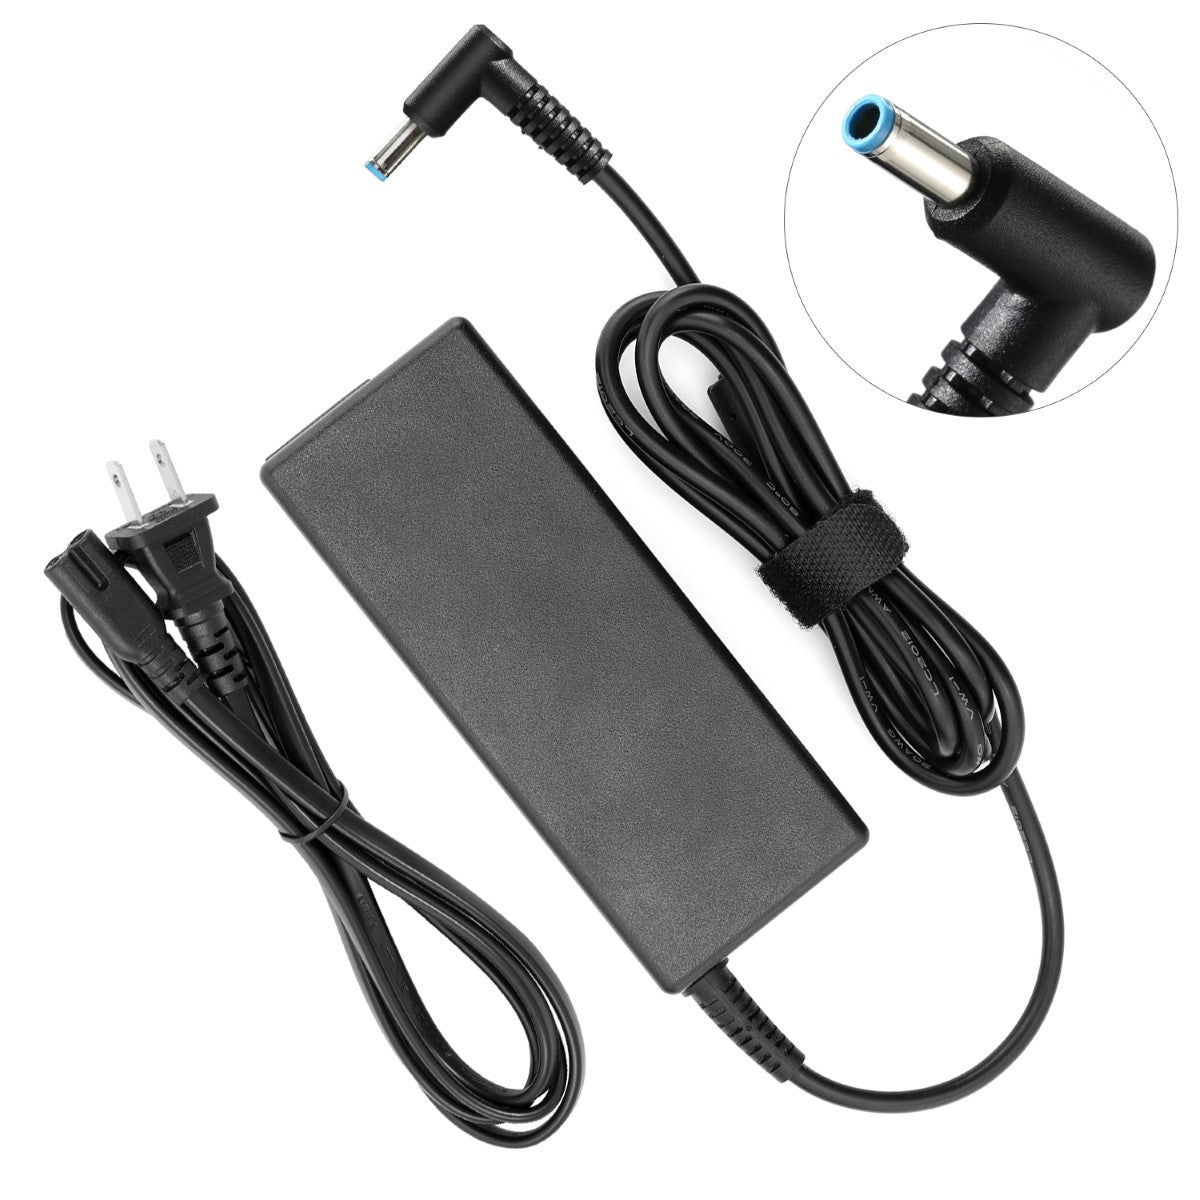 AC Adapter Charger for HP Pavilion 13-p111nr x2 Notebook.